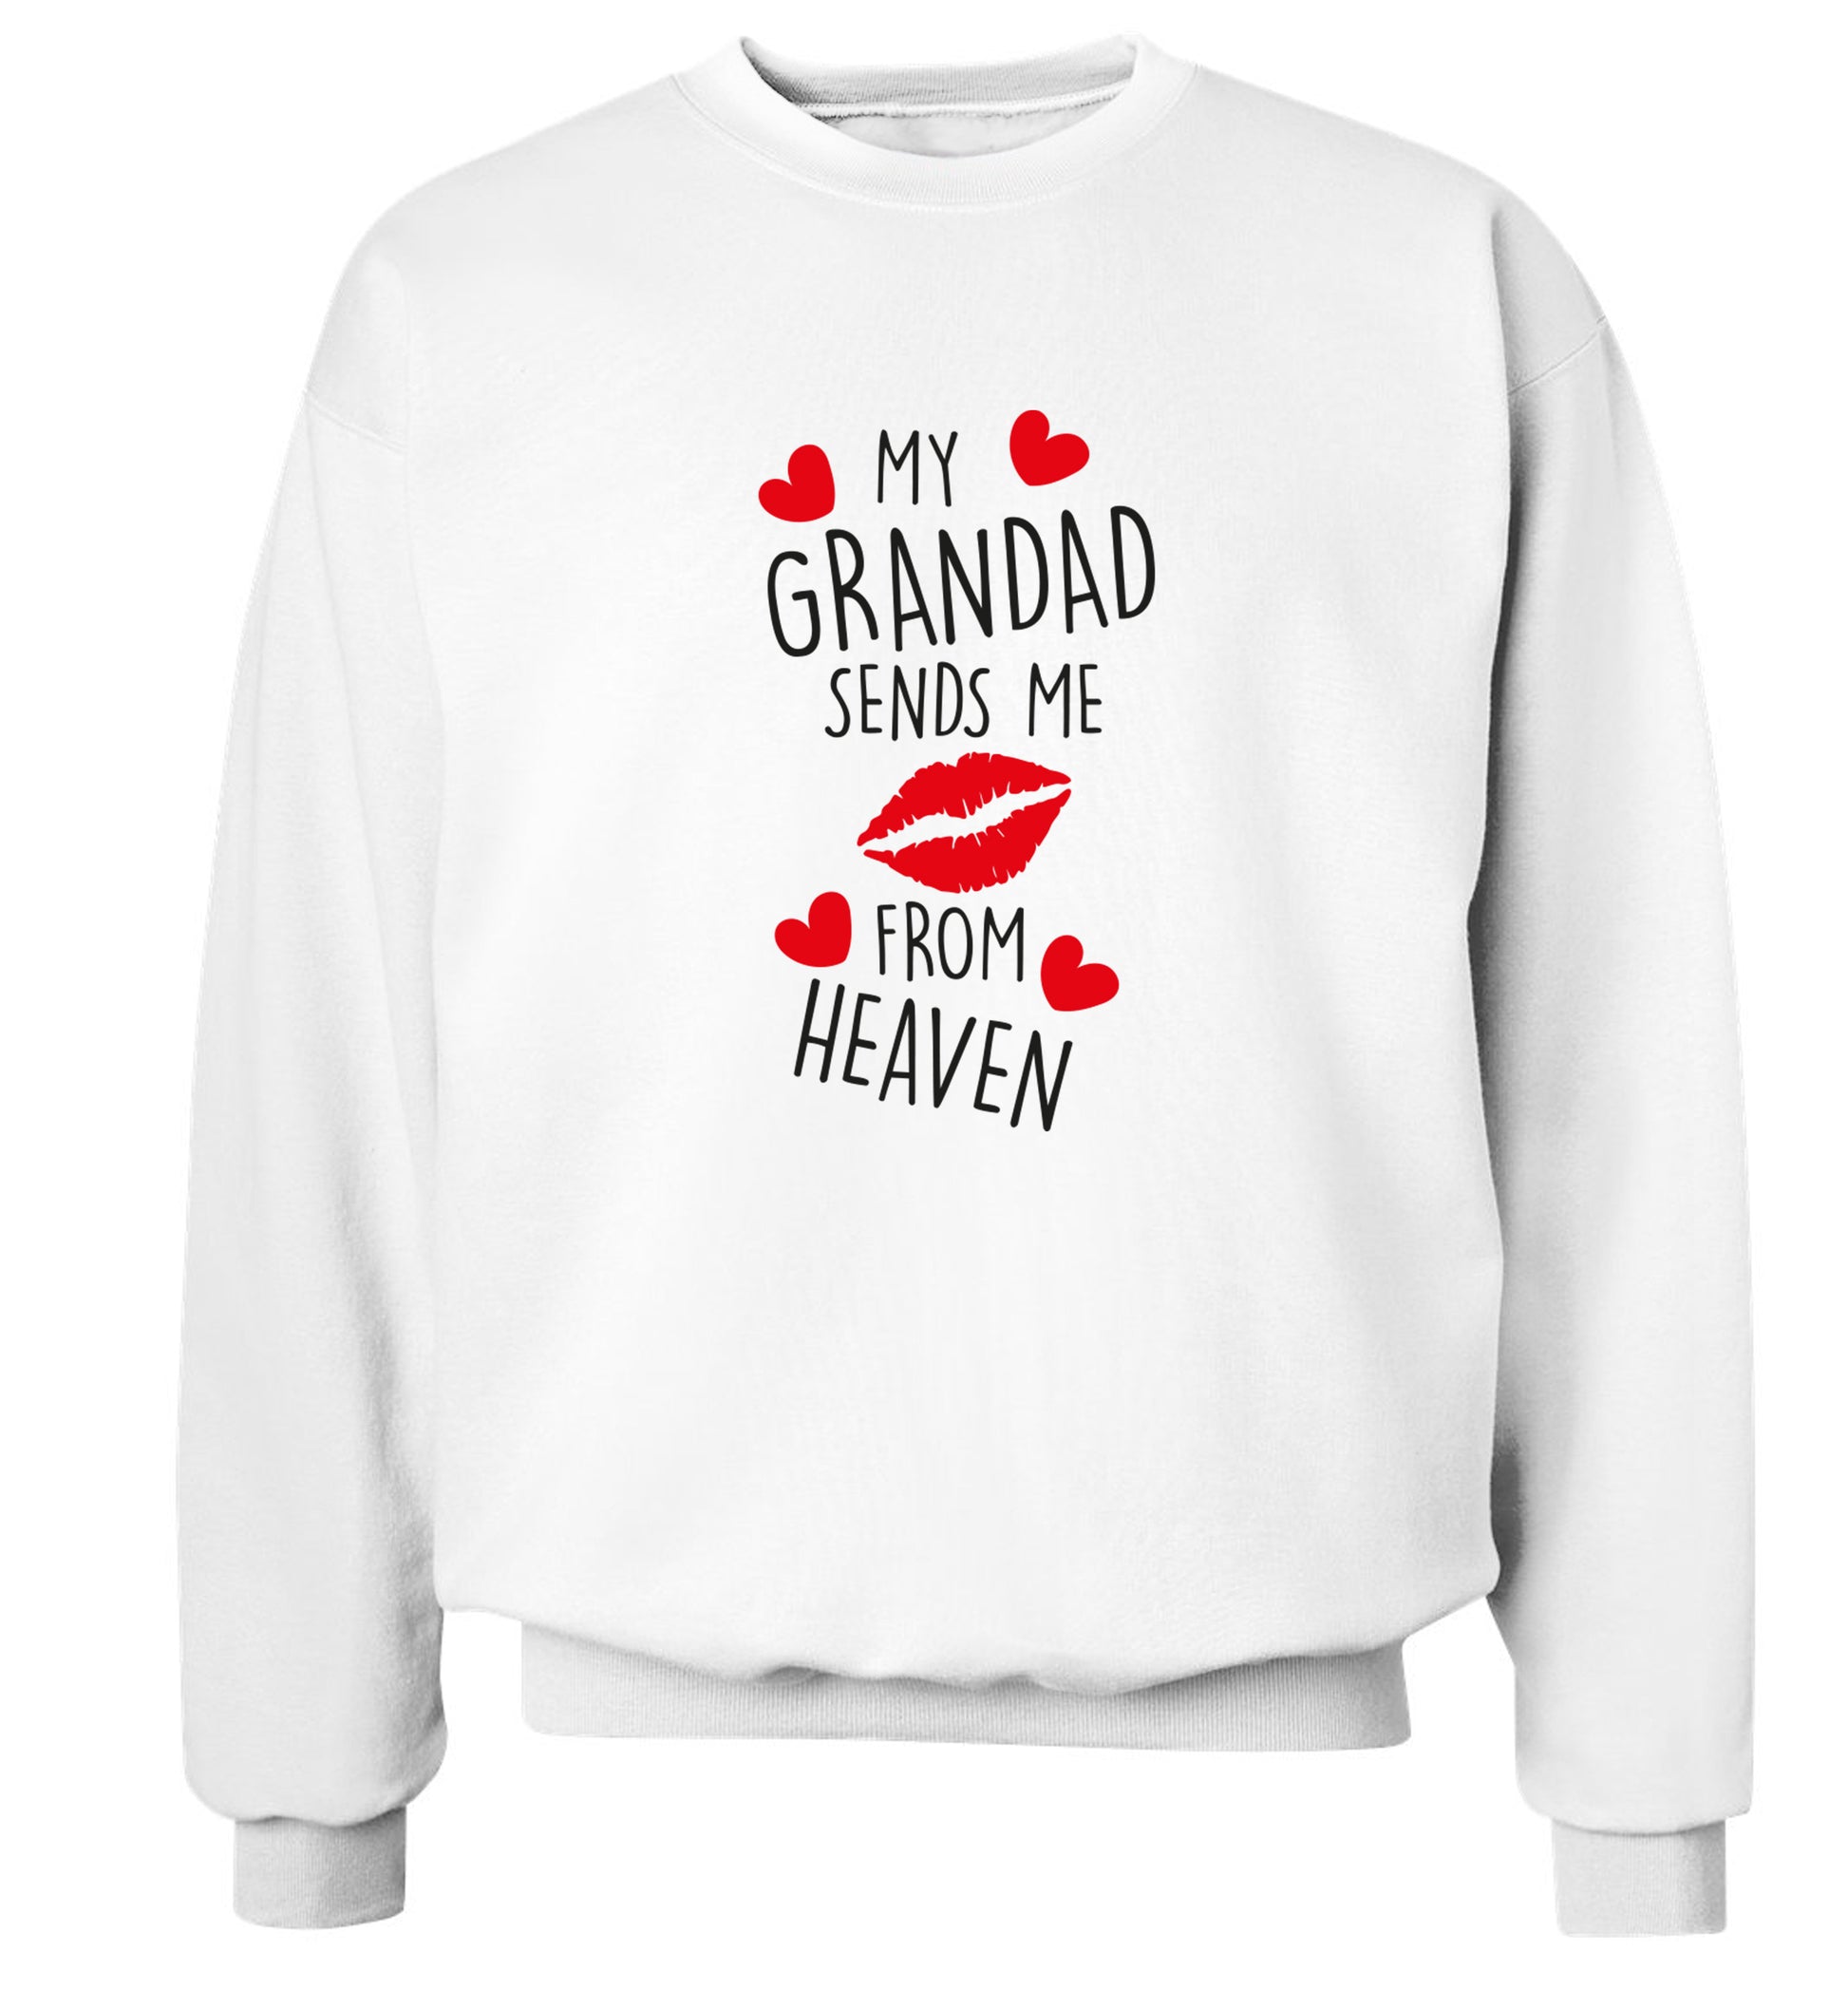 My grandad sends me kisses from heaven Adult's unisex white Sweater 2XL